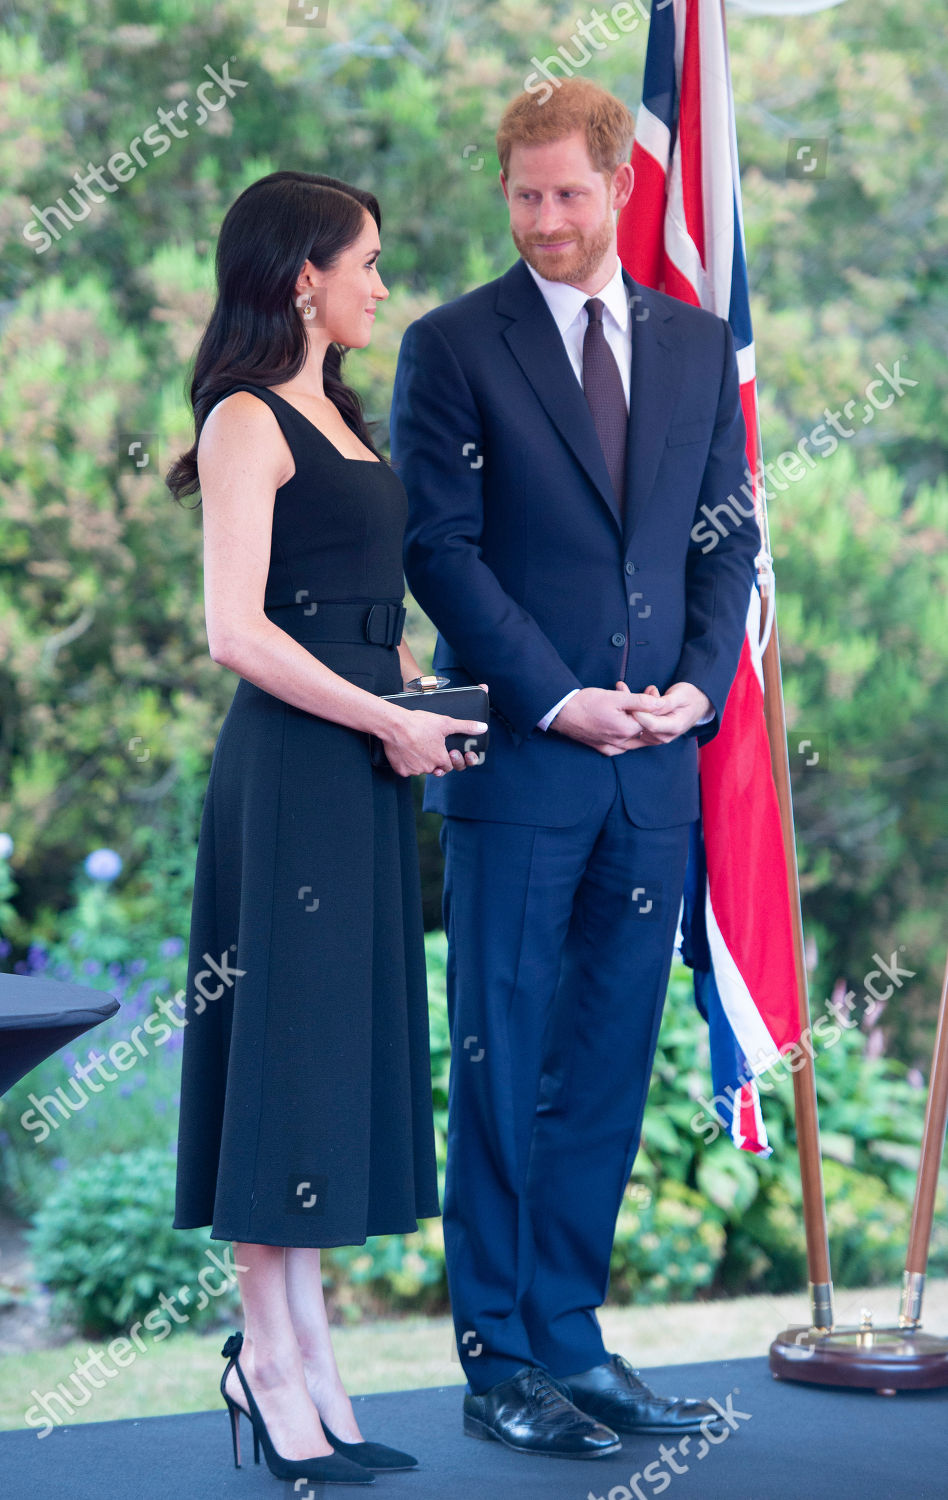 prince-harry-and-meghan-duchess-of-sussex-visit-to-dublin-ireland-shutterstock-editorial-9754264k.jpg